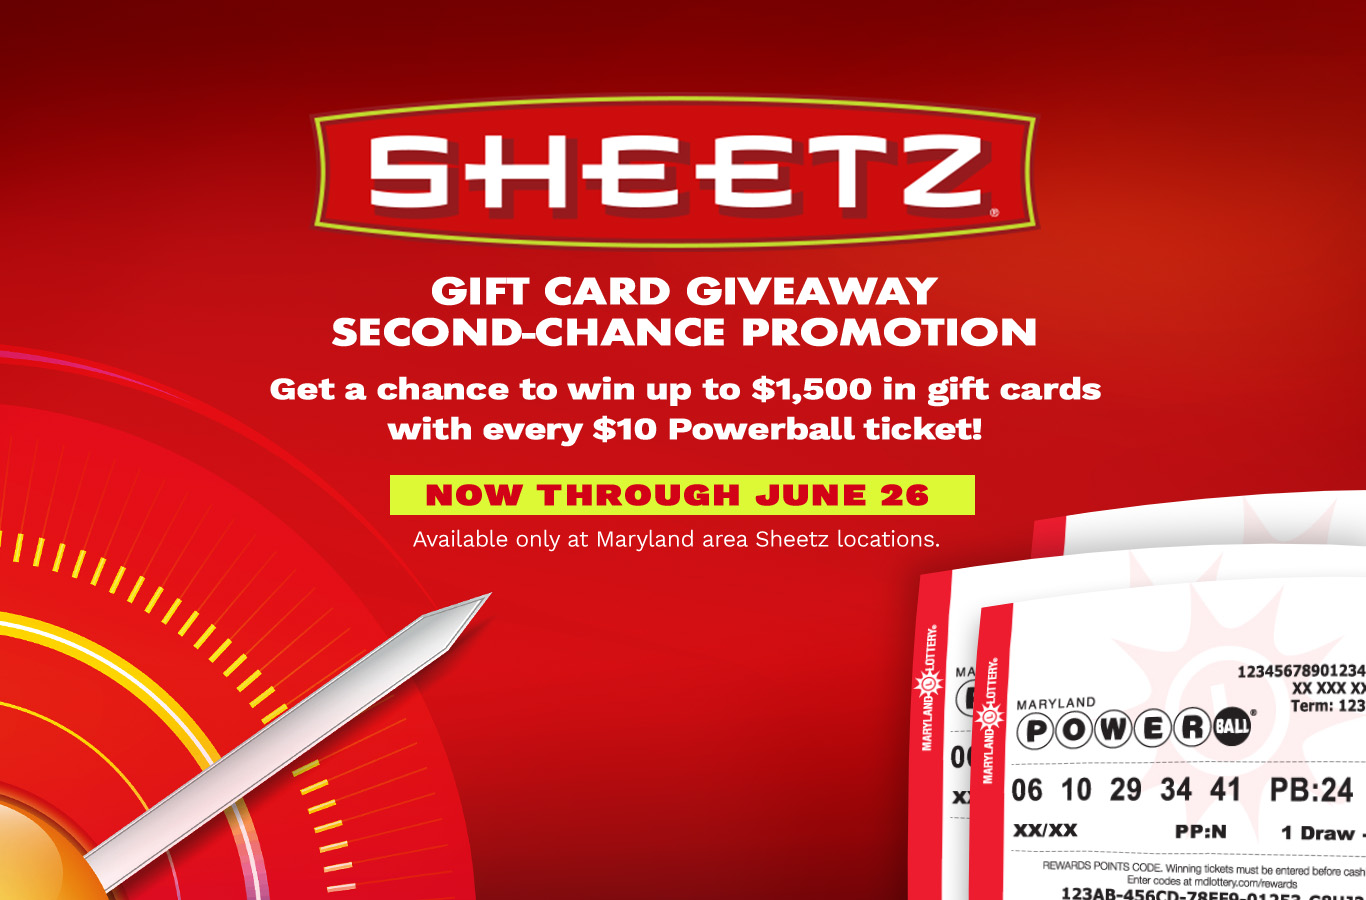 With the Sheetz Gift Card Giveaway second-chance promotion, get a chance to win up to $1,500 in gift cards with every $10 Powerball ticket.